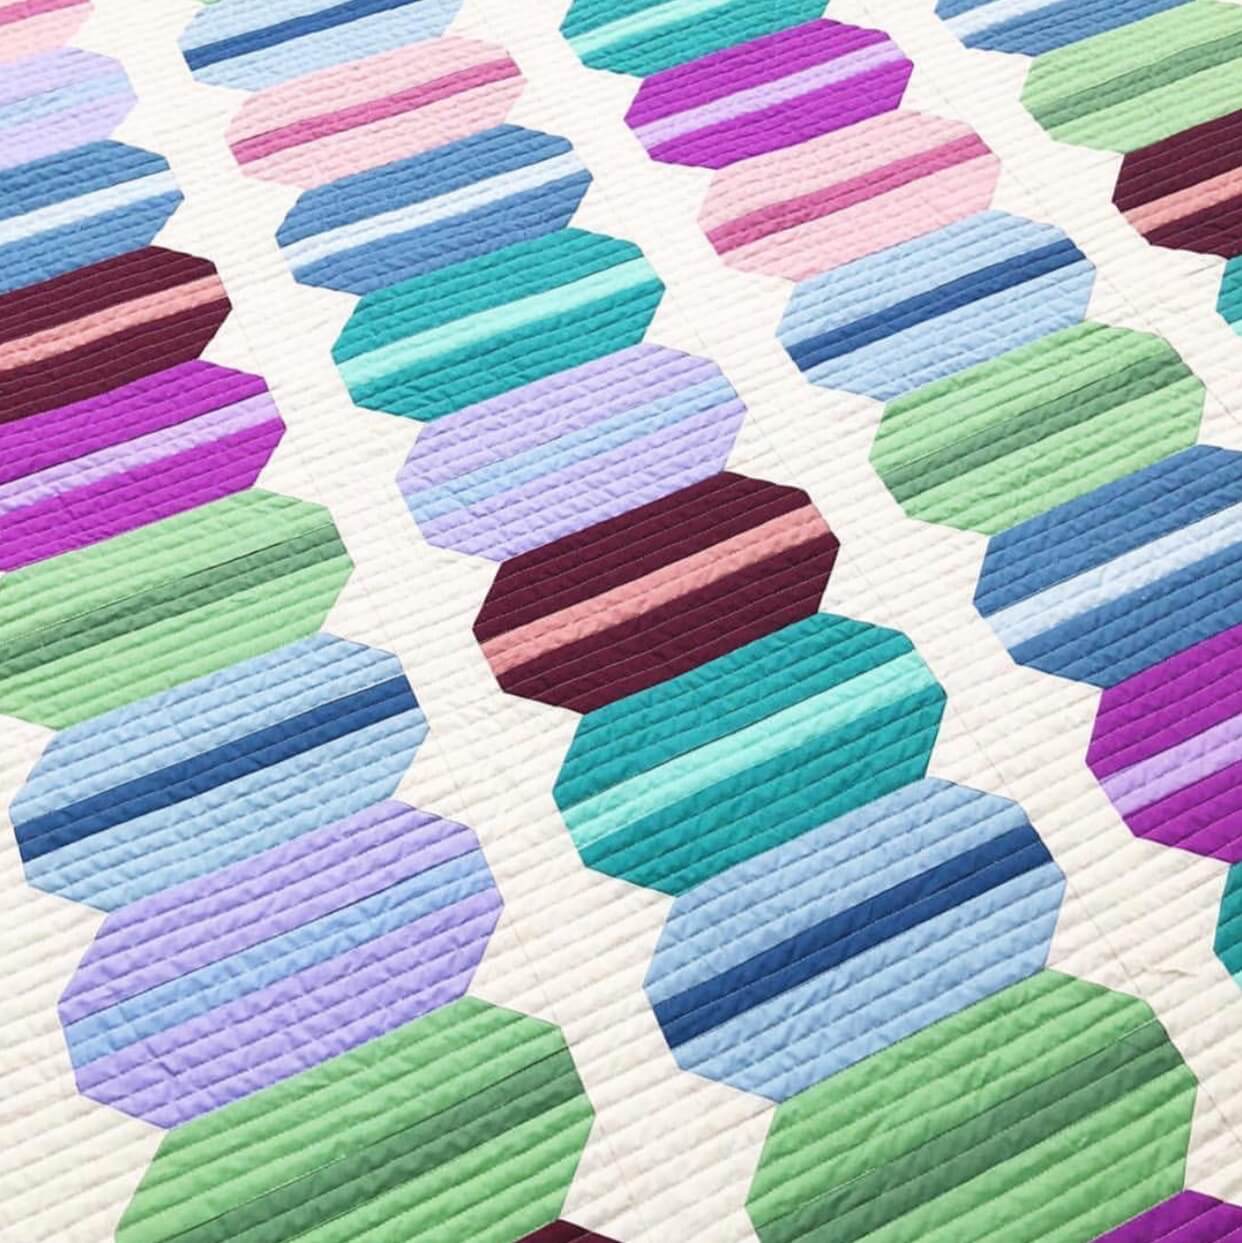 French Macaron Quilt Printed Pattern